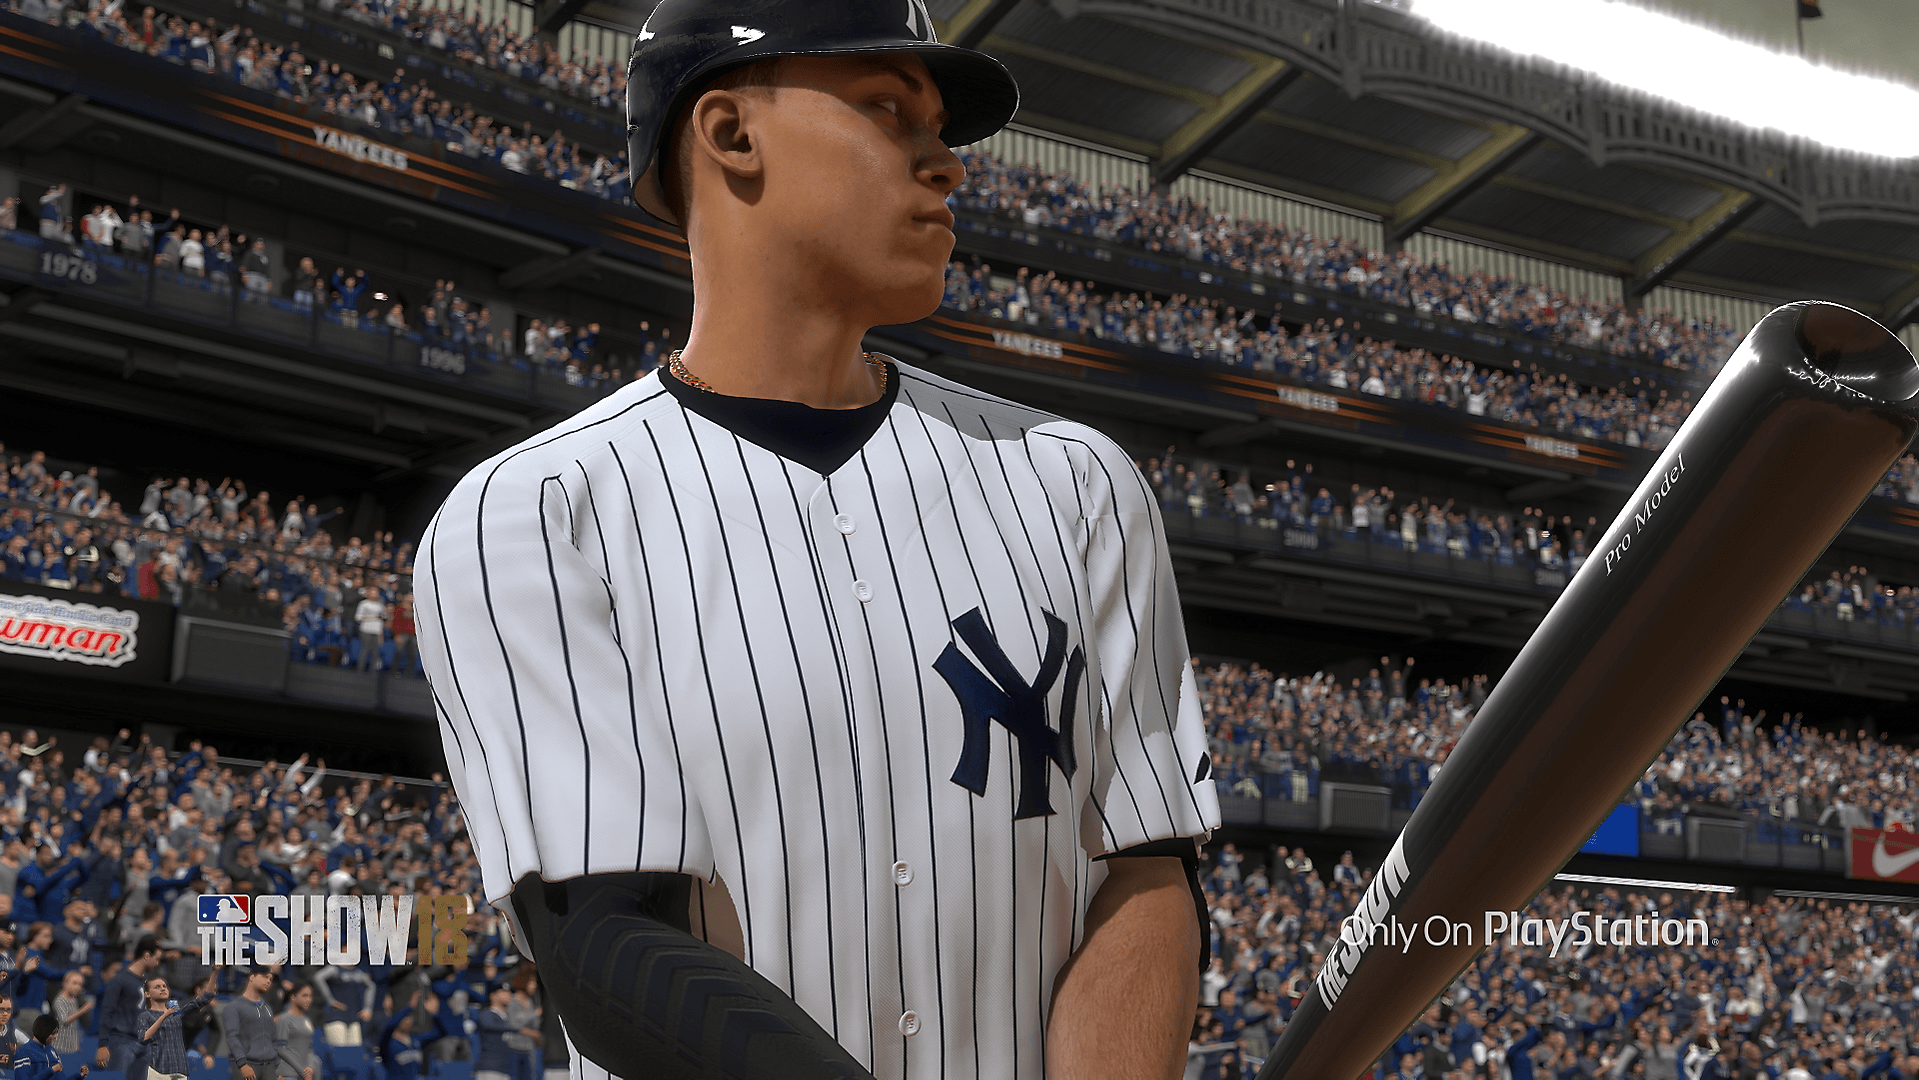 Free download MLB: The Show 18 HD Wallpapers.